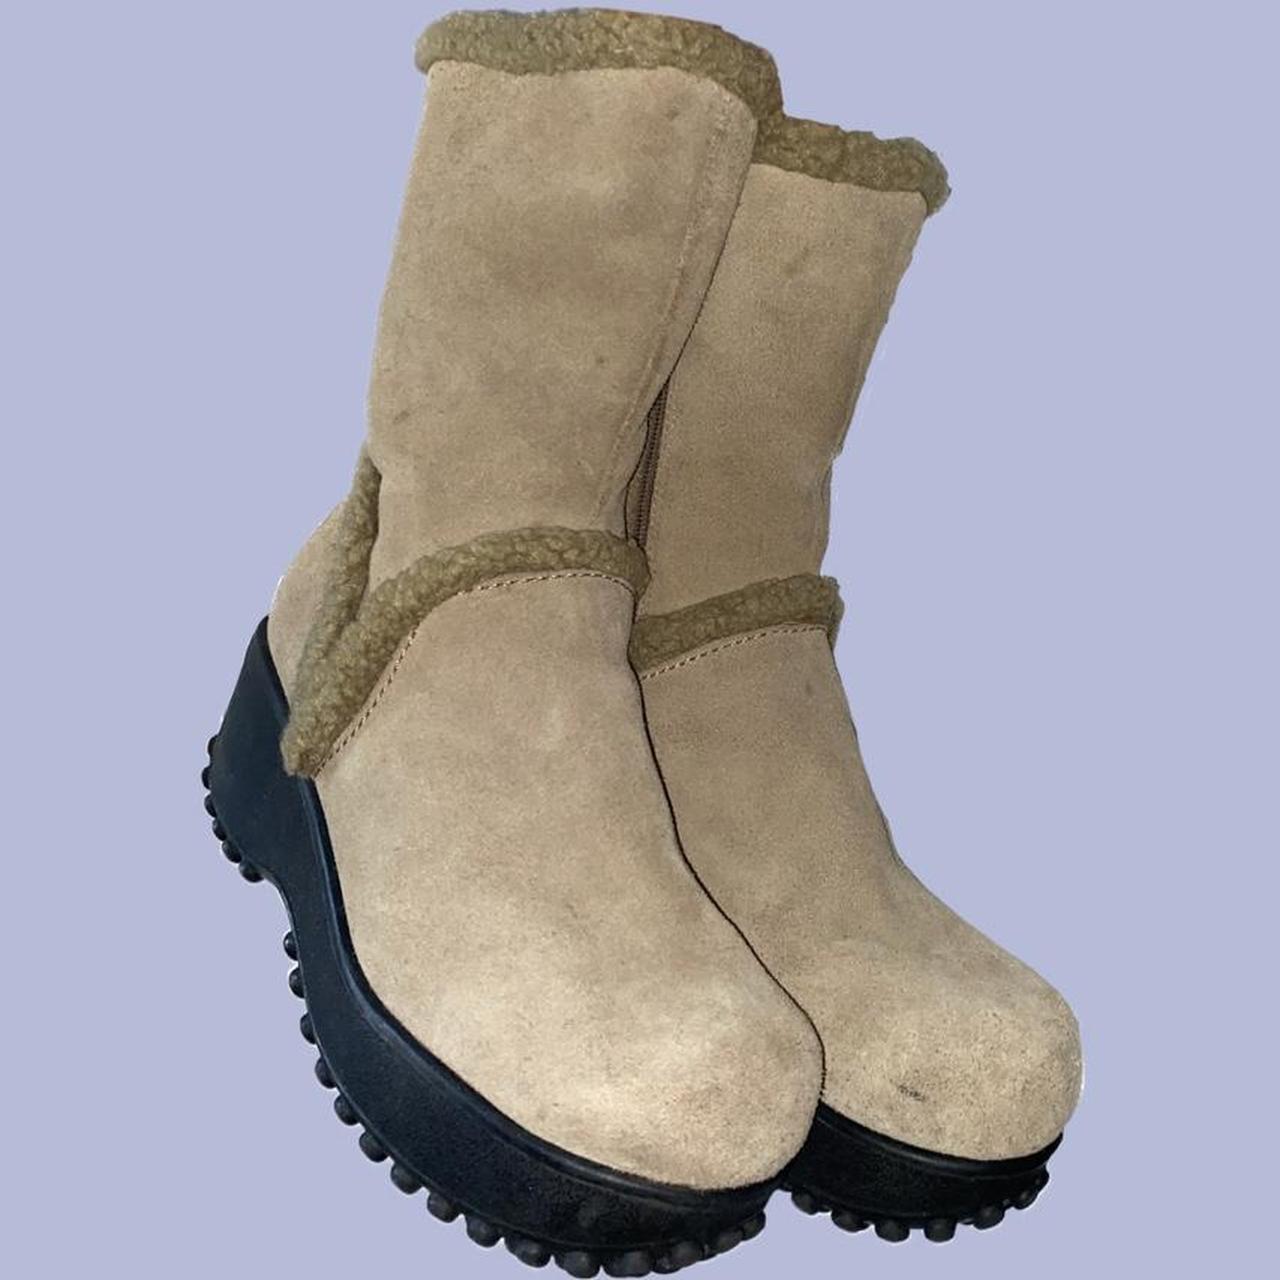 Product Image 3 - Chunky y2k platform suede boots
——————
-In